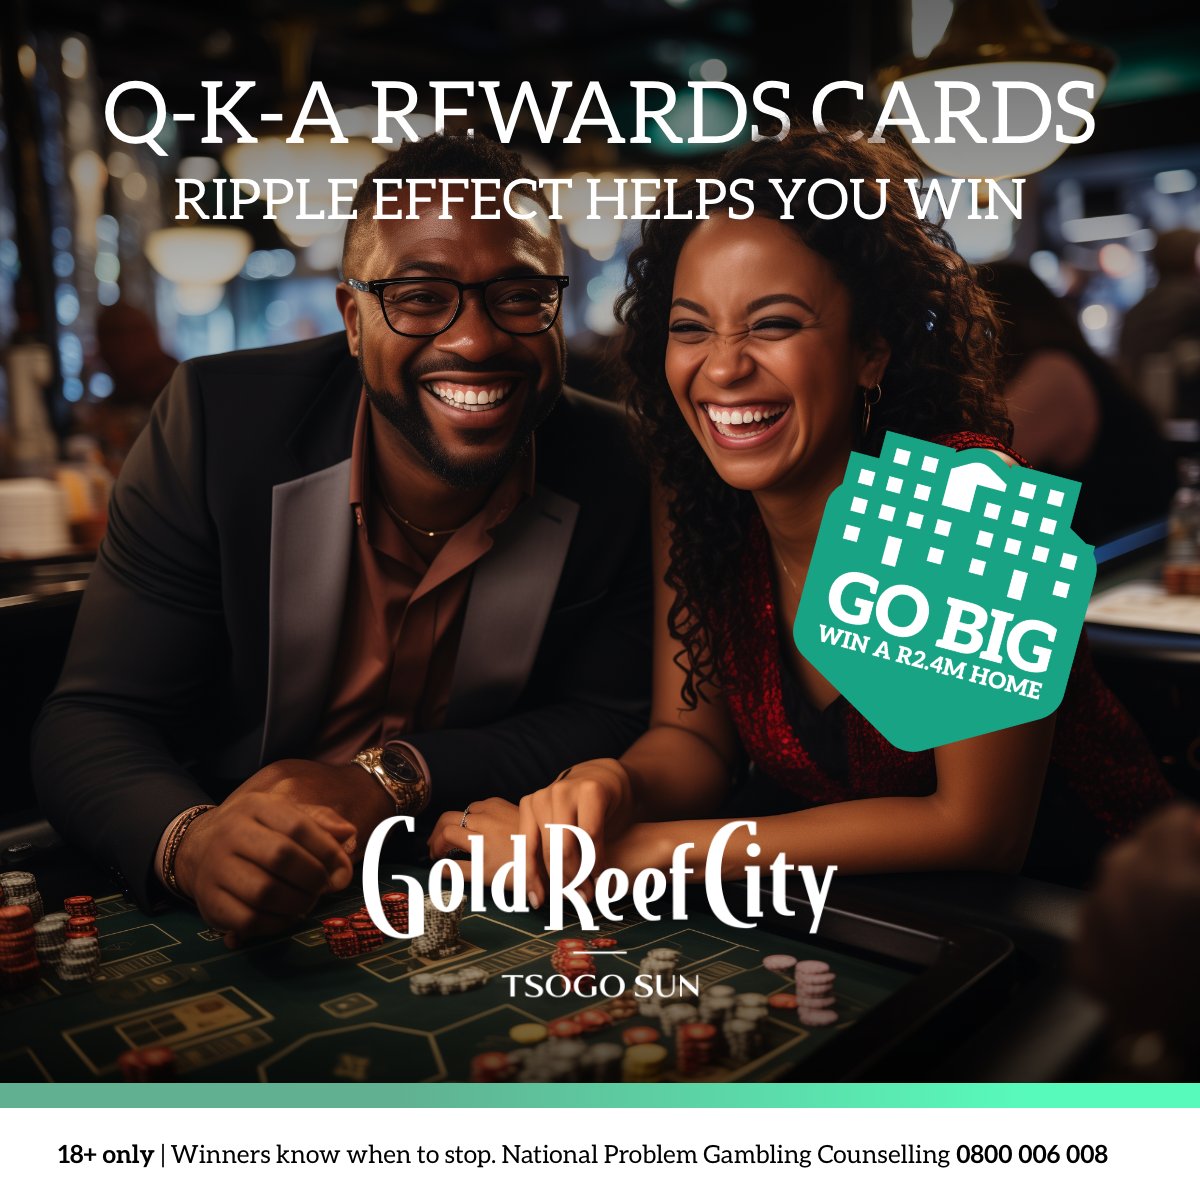 Calling all Q-K-A Rewards card holders who love Bonus Jackpots. Ripple Effect can make you a winner too. If you’re actively playing on the winning bank of machines or have a bet at the same table, you will win instant cash too. Join us tonight from 18h00 to 21h00. Rules and more